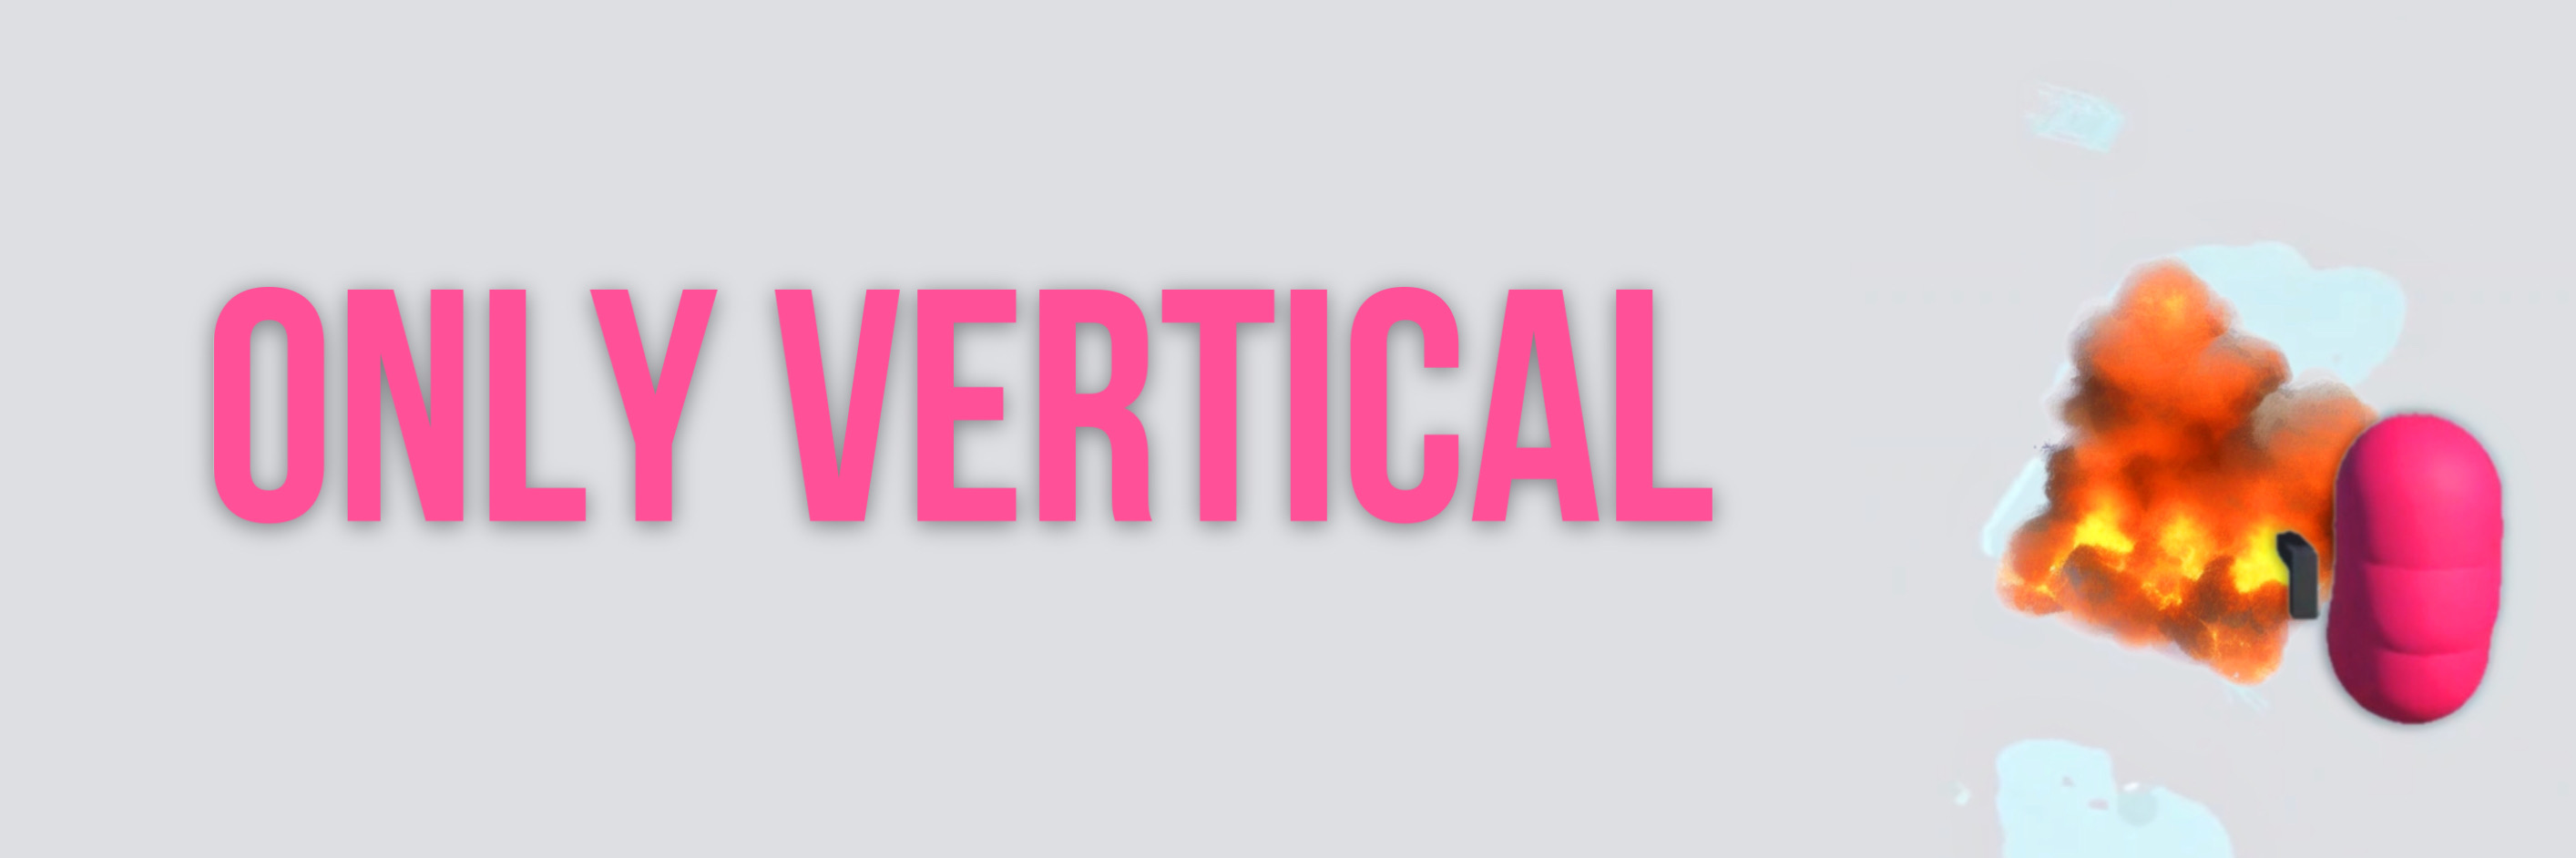 Only Vertical